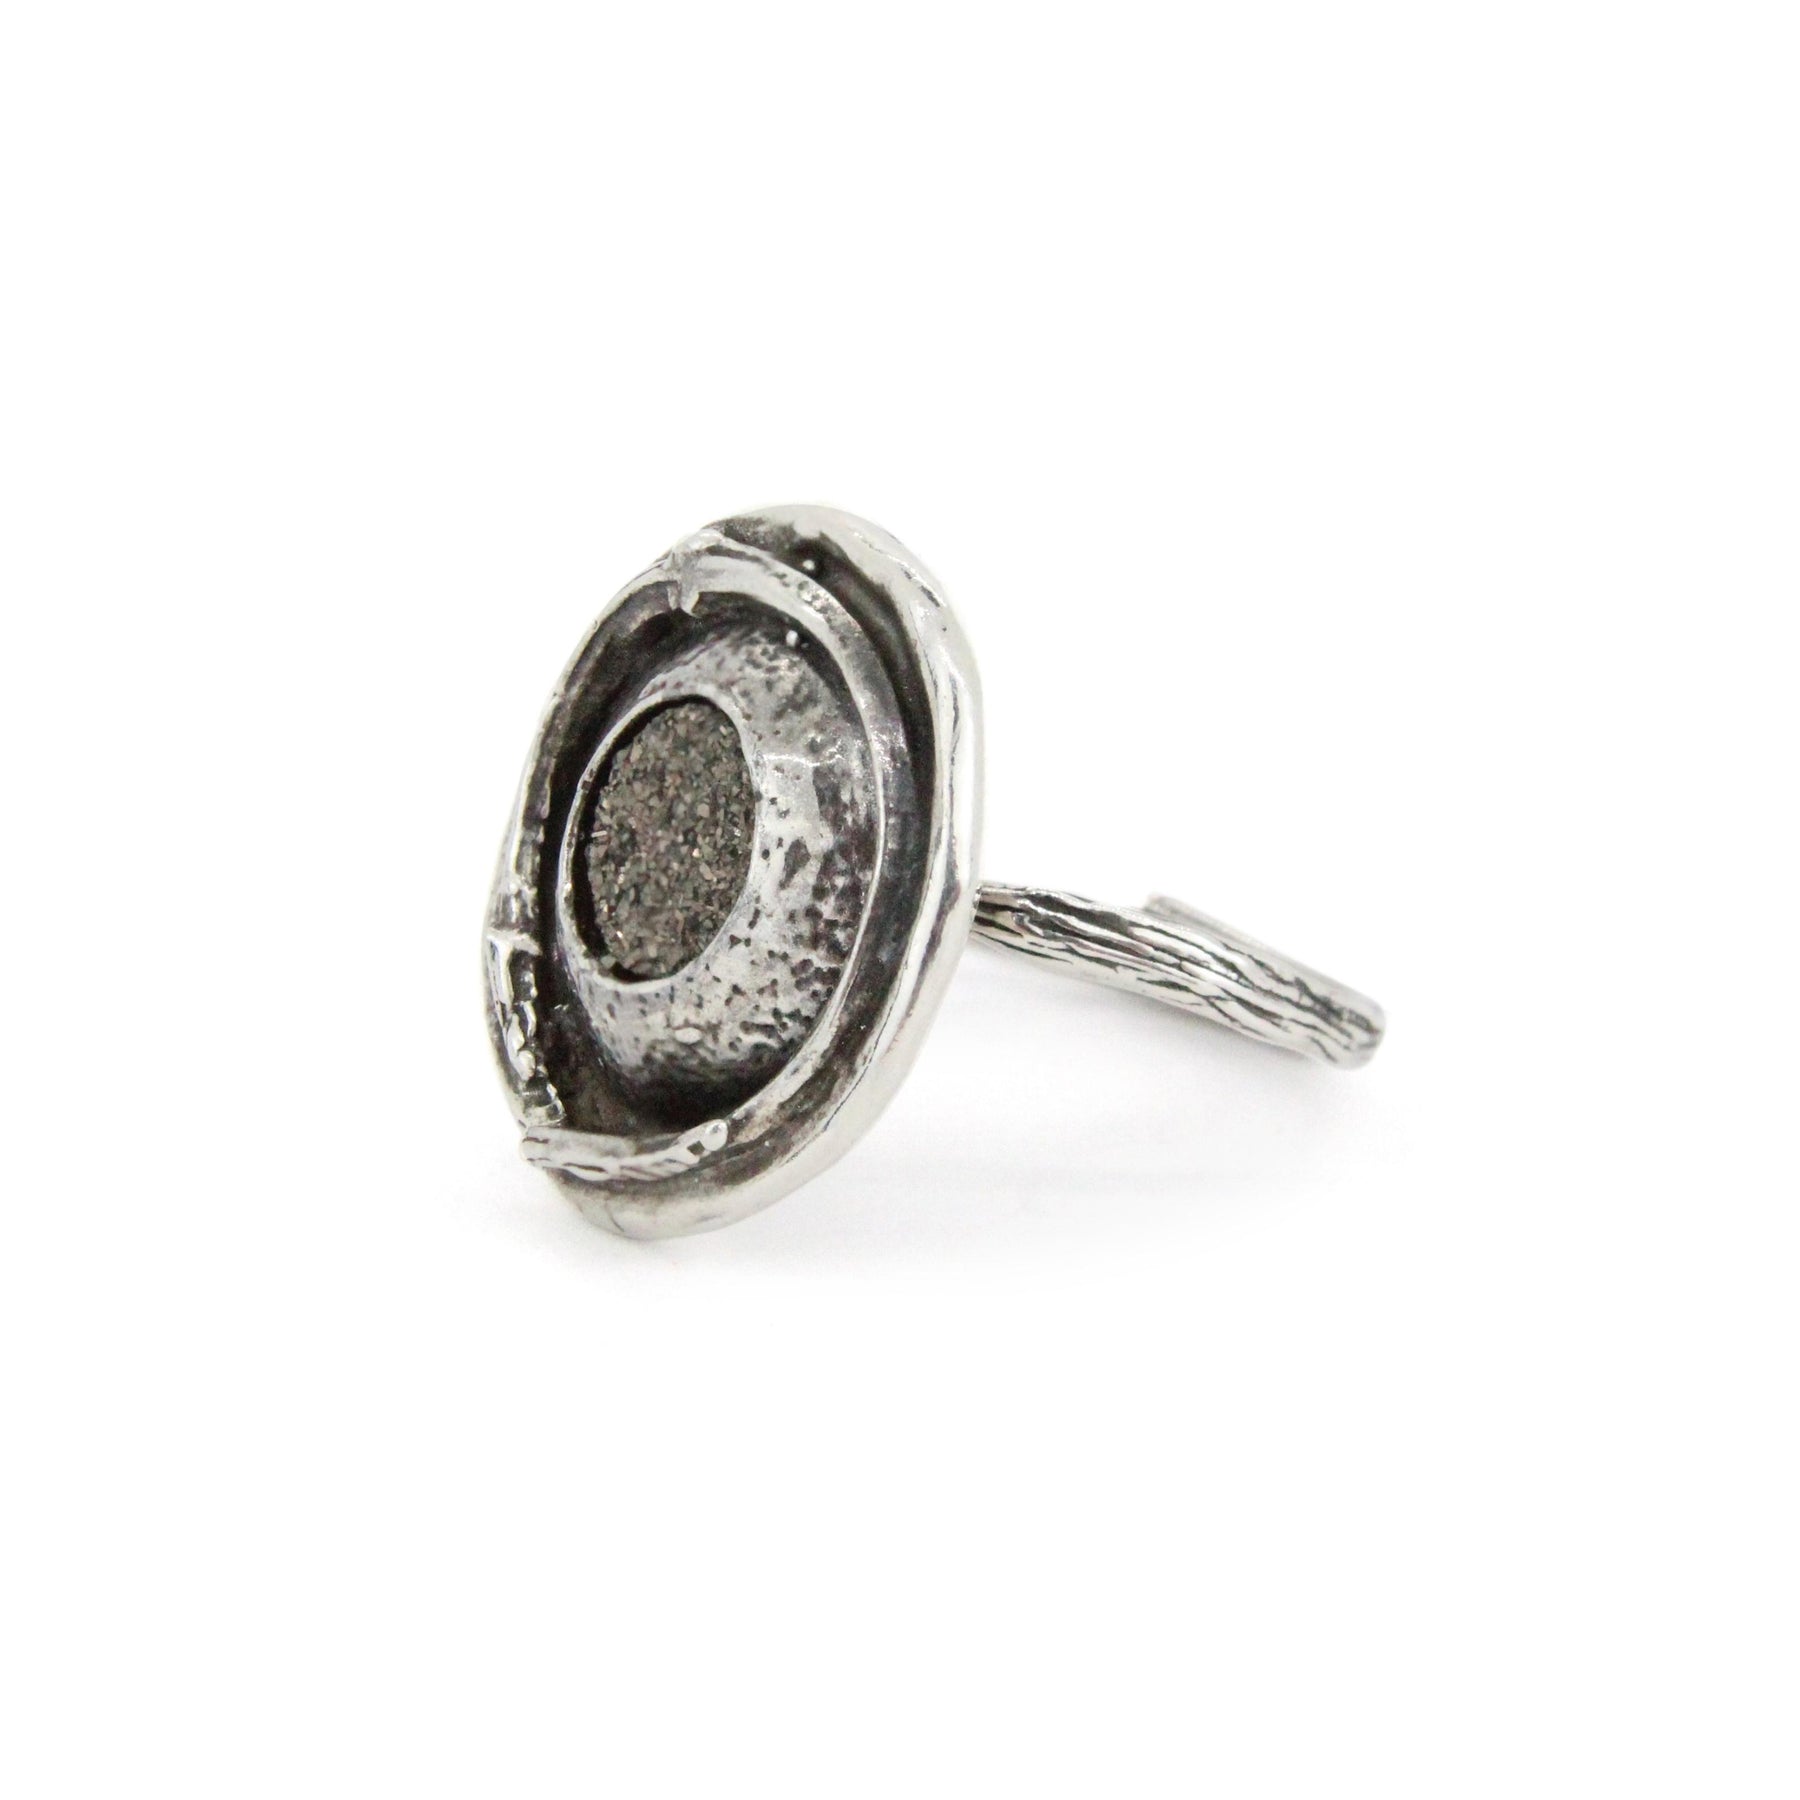 Fiddlehead Ring - Susan Rodgers Designs